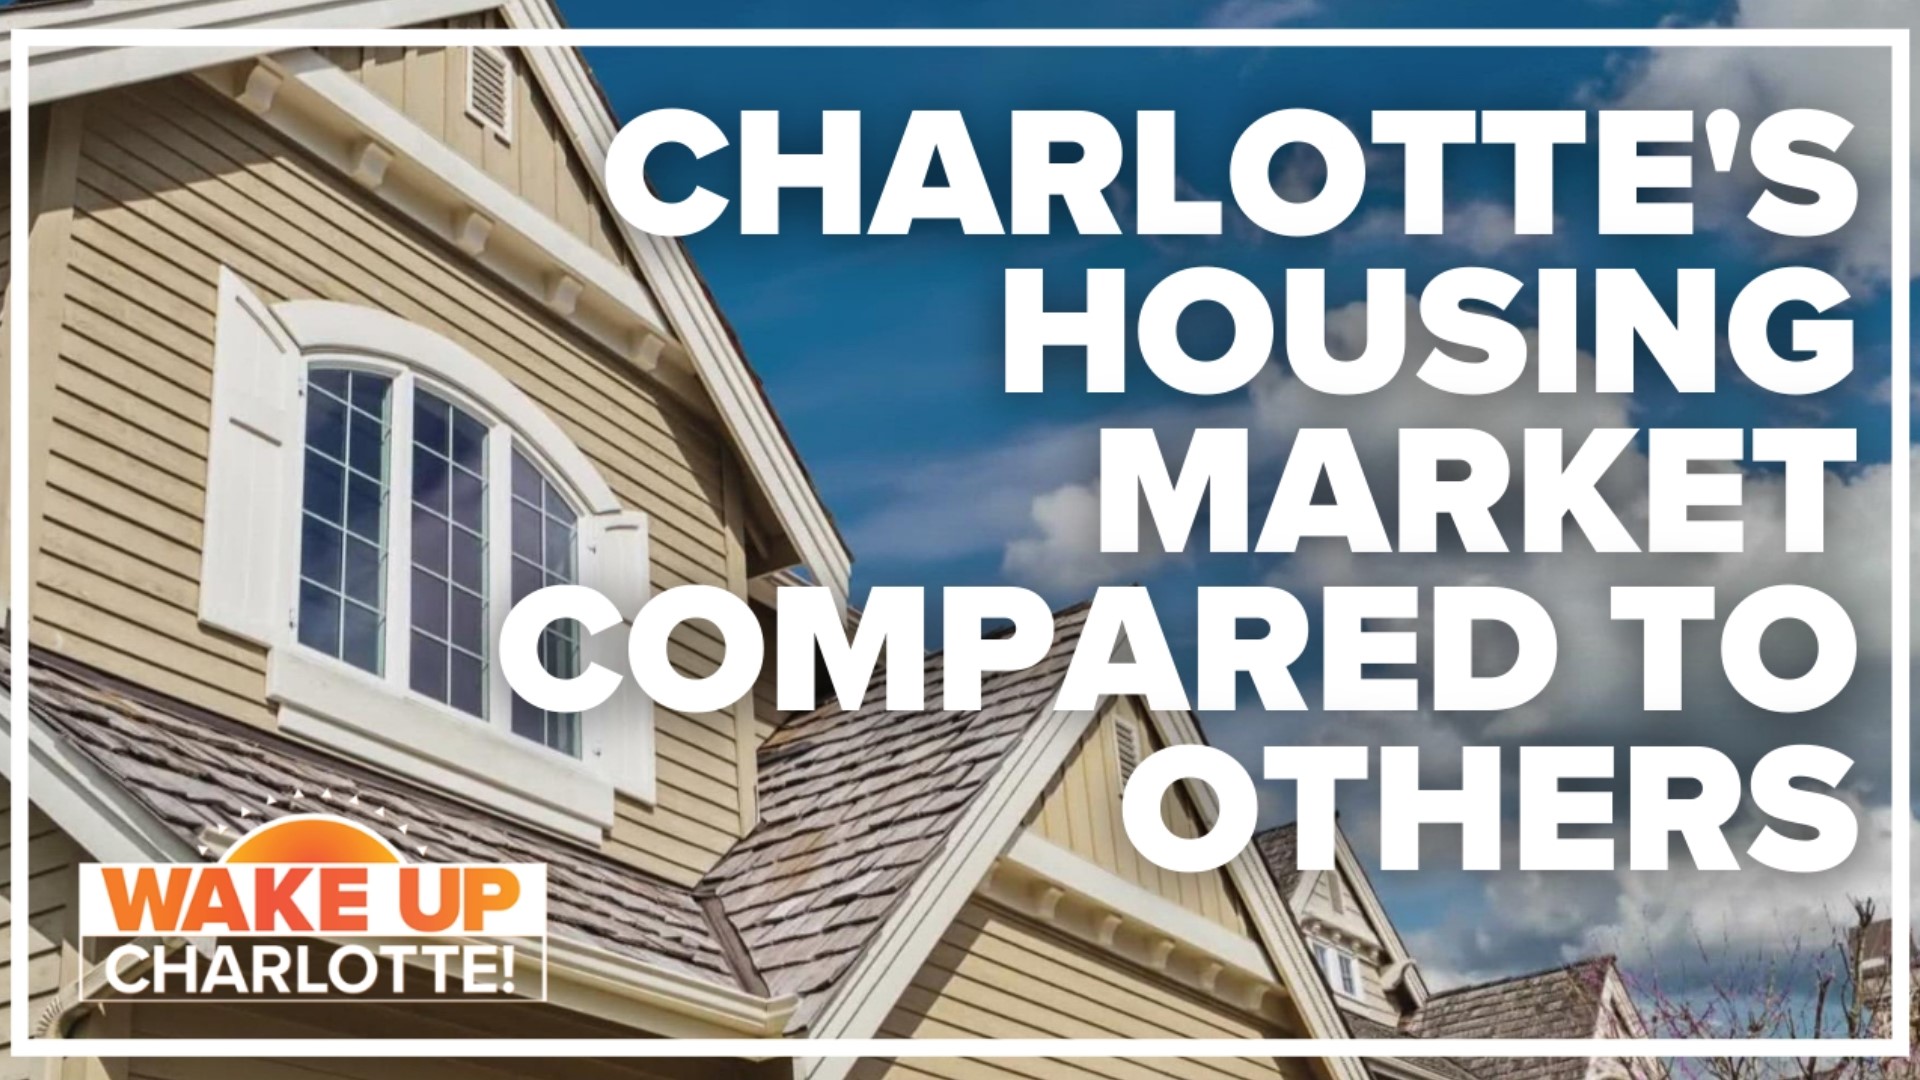 With the market still on fire, how does Charlotte's home inventory compare to other cities across the country?